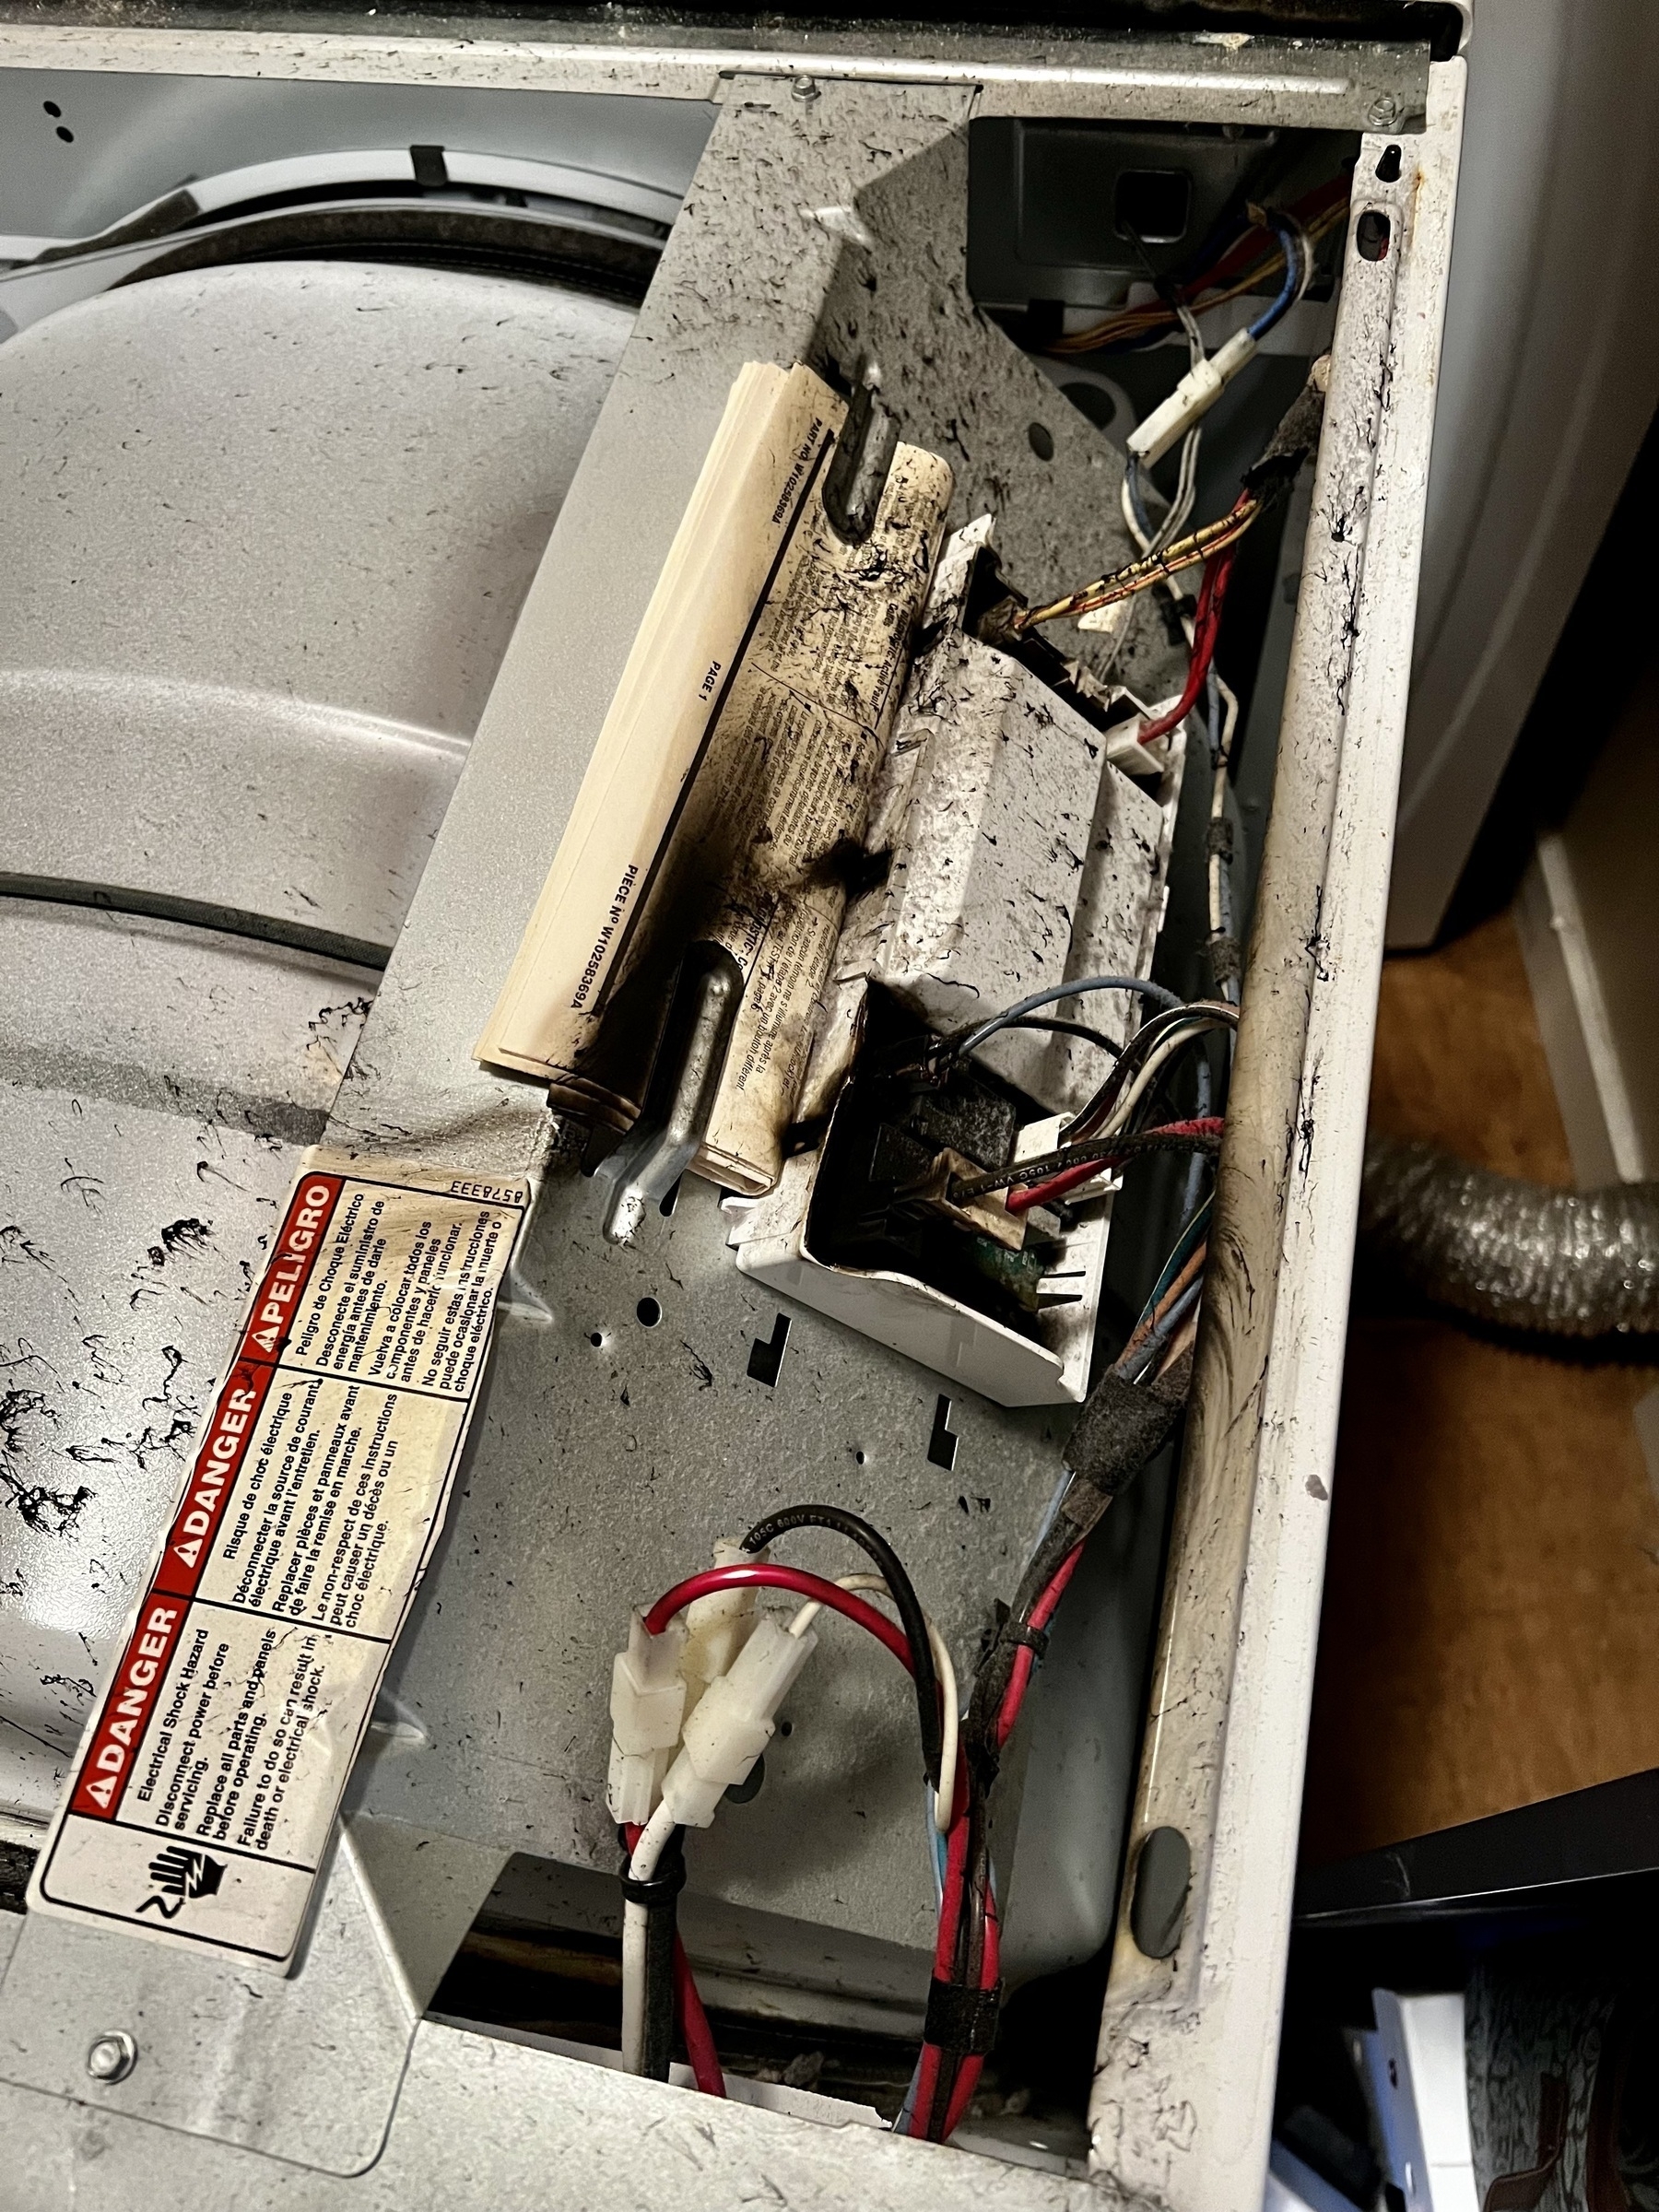 Image of the top of a clothes dryer with the top removed showing blackened circuit board area.